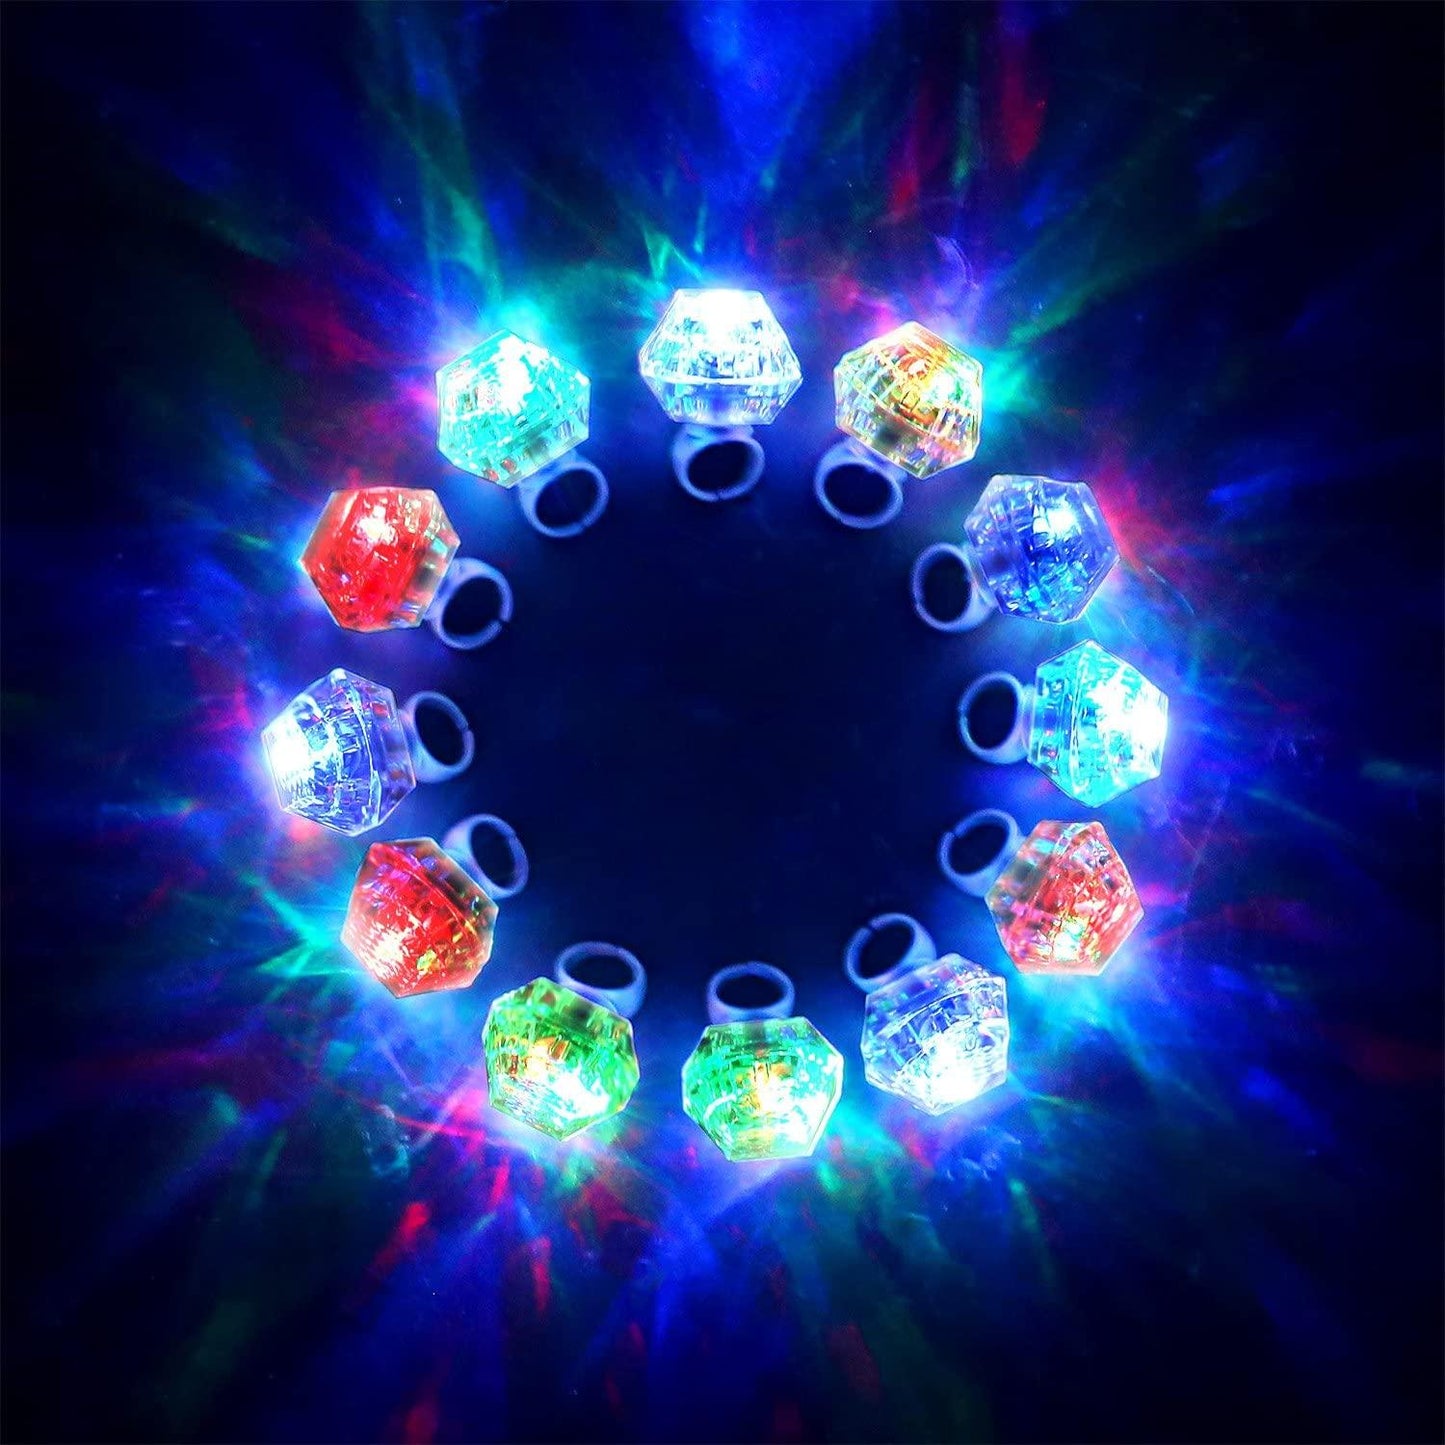 LED Light Up Jewel Engagement Party Rings / Bachelorette/ Wedding Party Favors - If you say i do